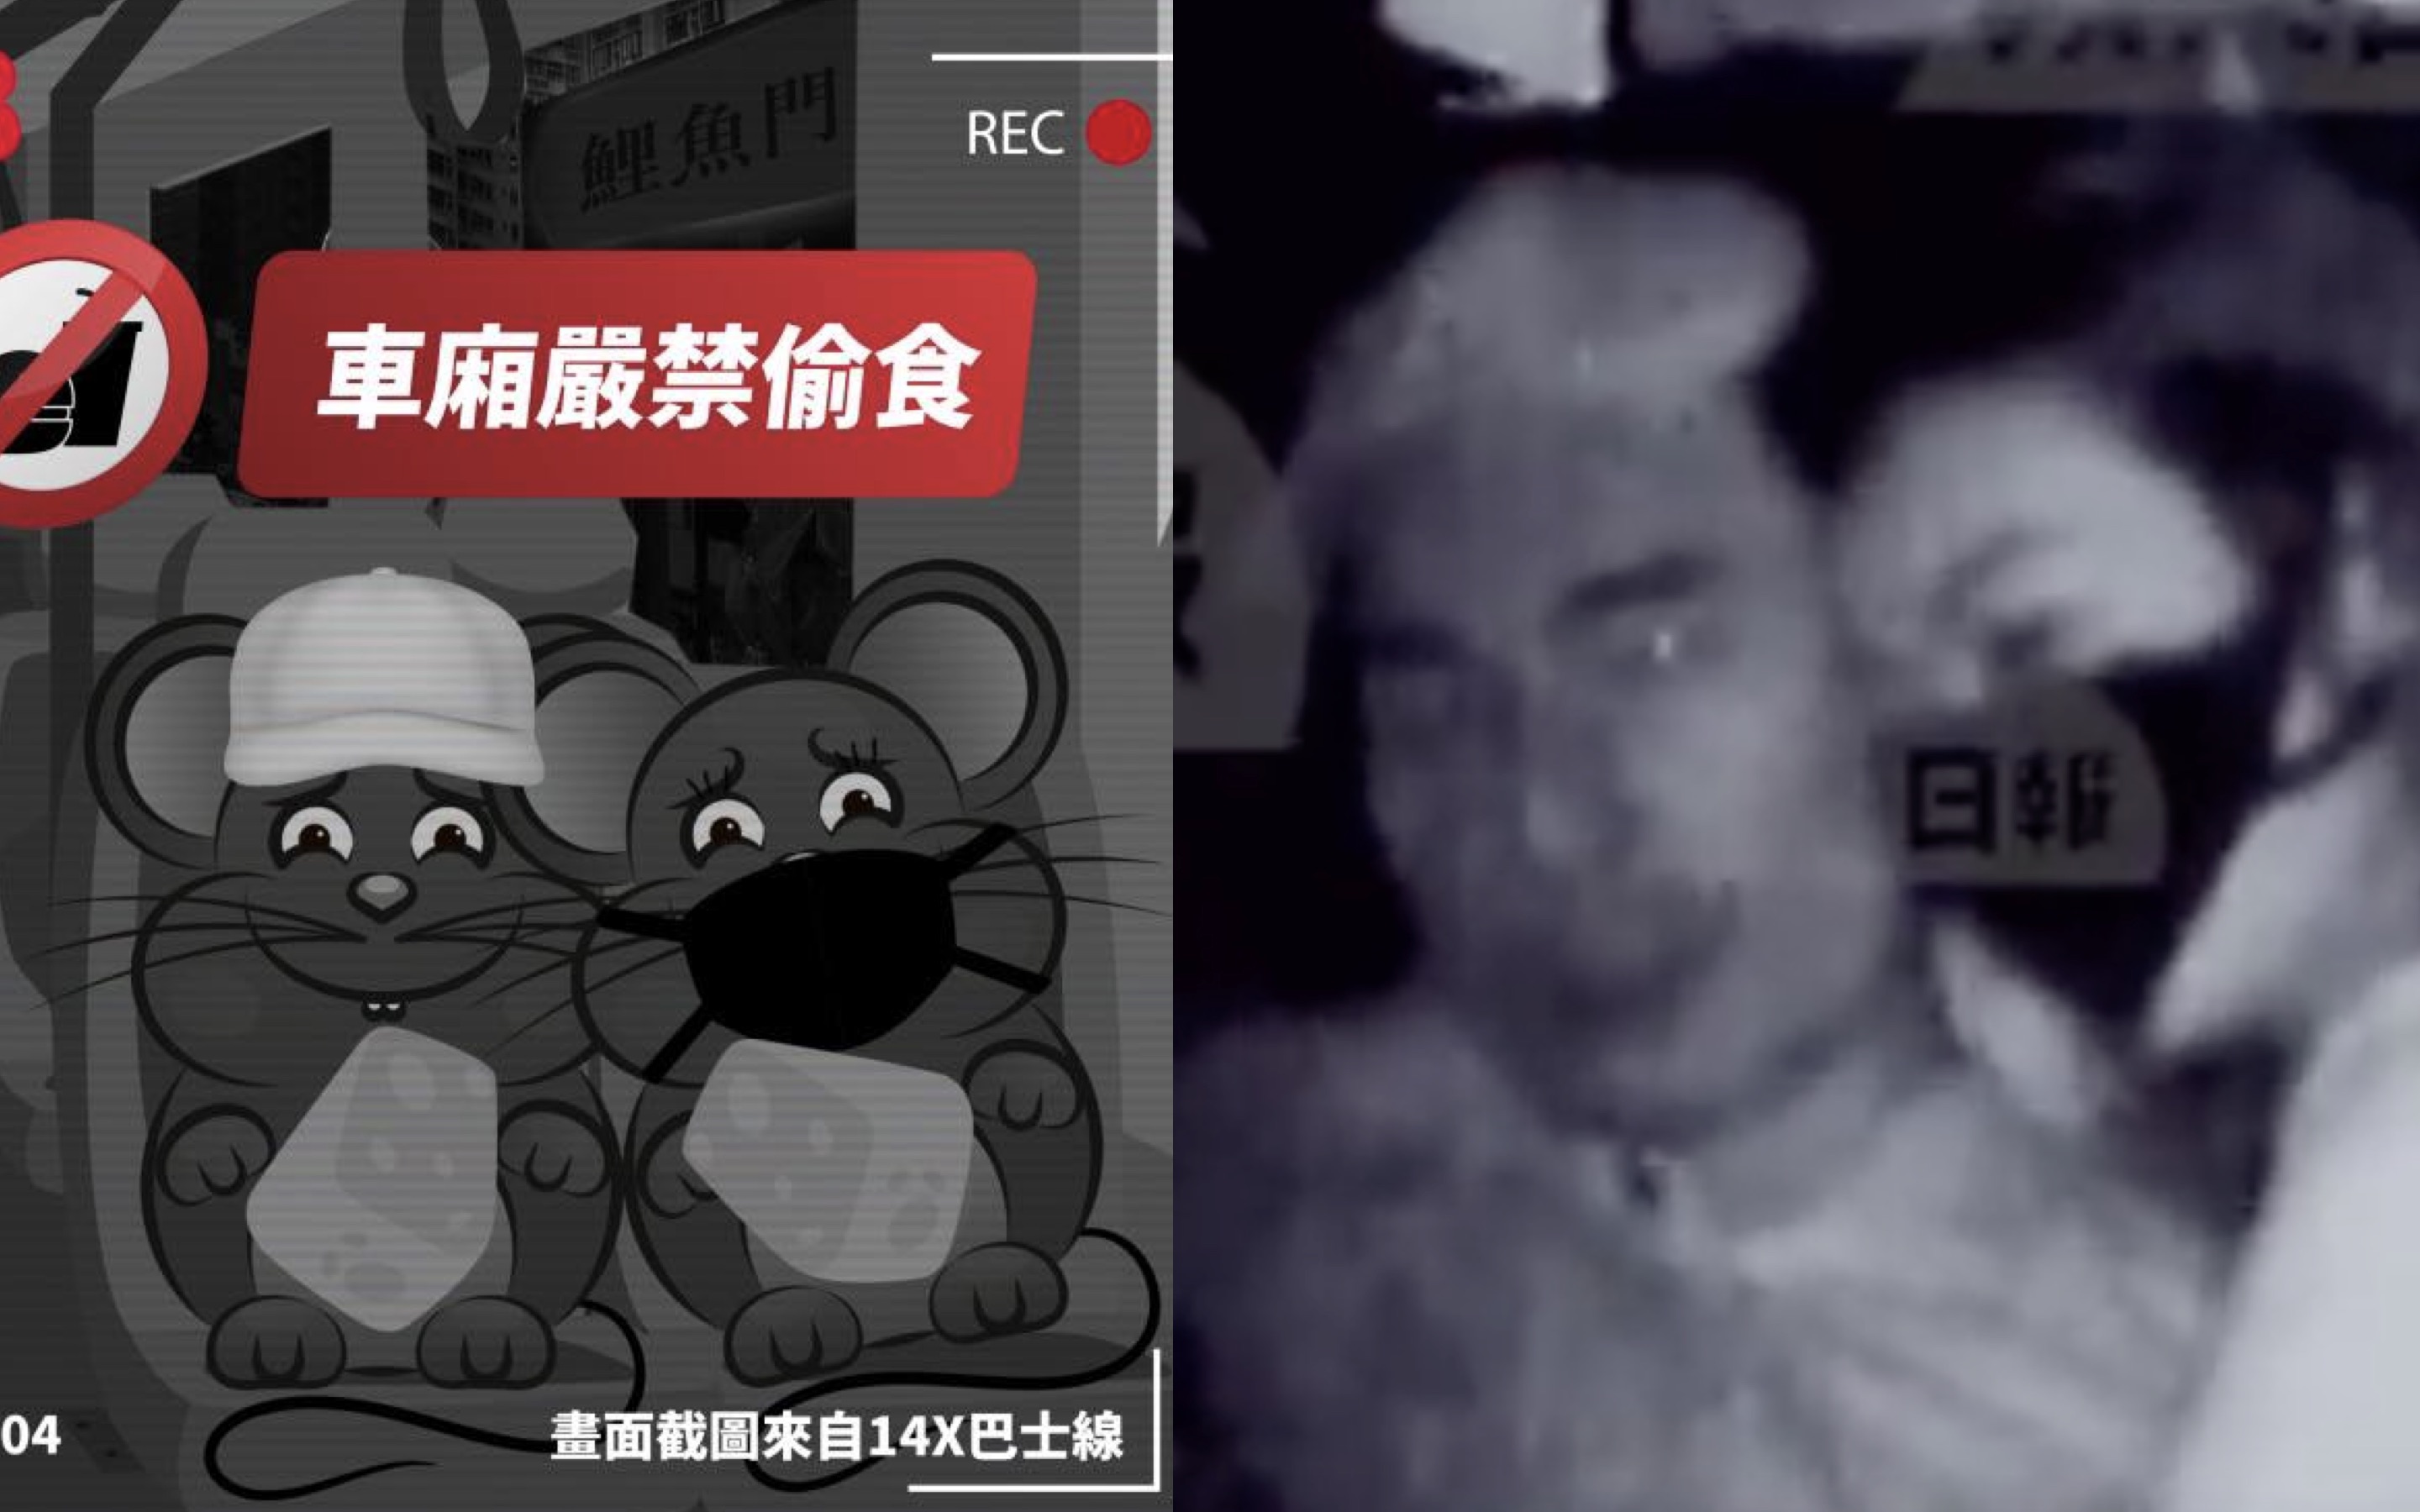 (Left) A Kowloon Motorbus social media post mocking celebrities Andy Hui and Jacqueline Wong, who were caught on camera cheating on their partners in a cab ride. Photos and screengrabs via Facebook/KMB and Apple Daily video.